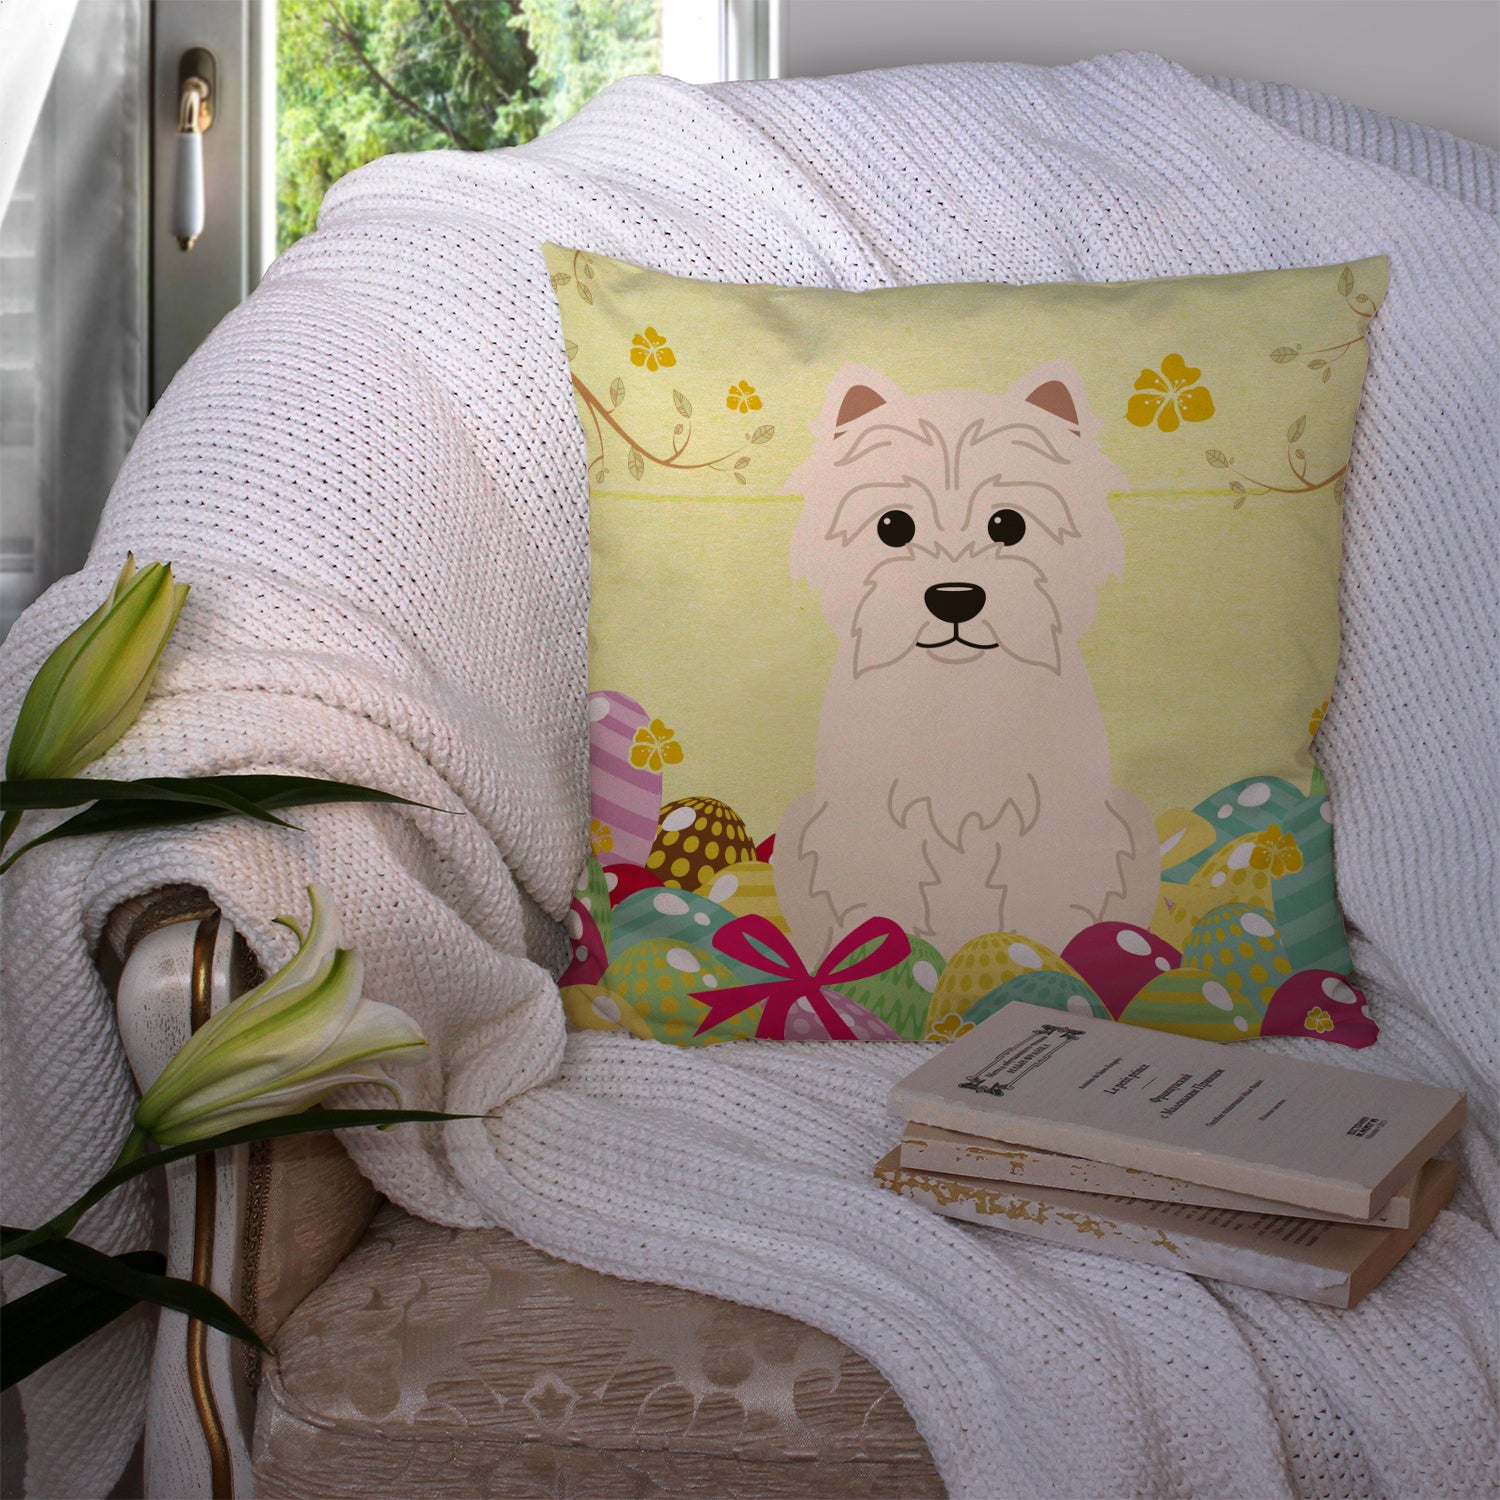 Easter Eggs Westie Fabric Decorative Pillow BB6042PW1414 - the-store.com